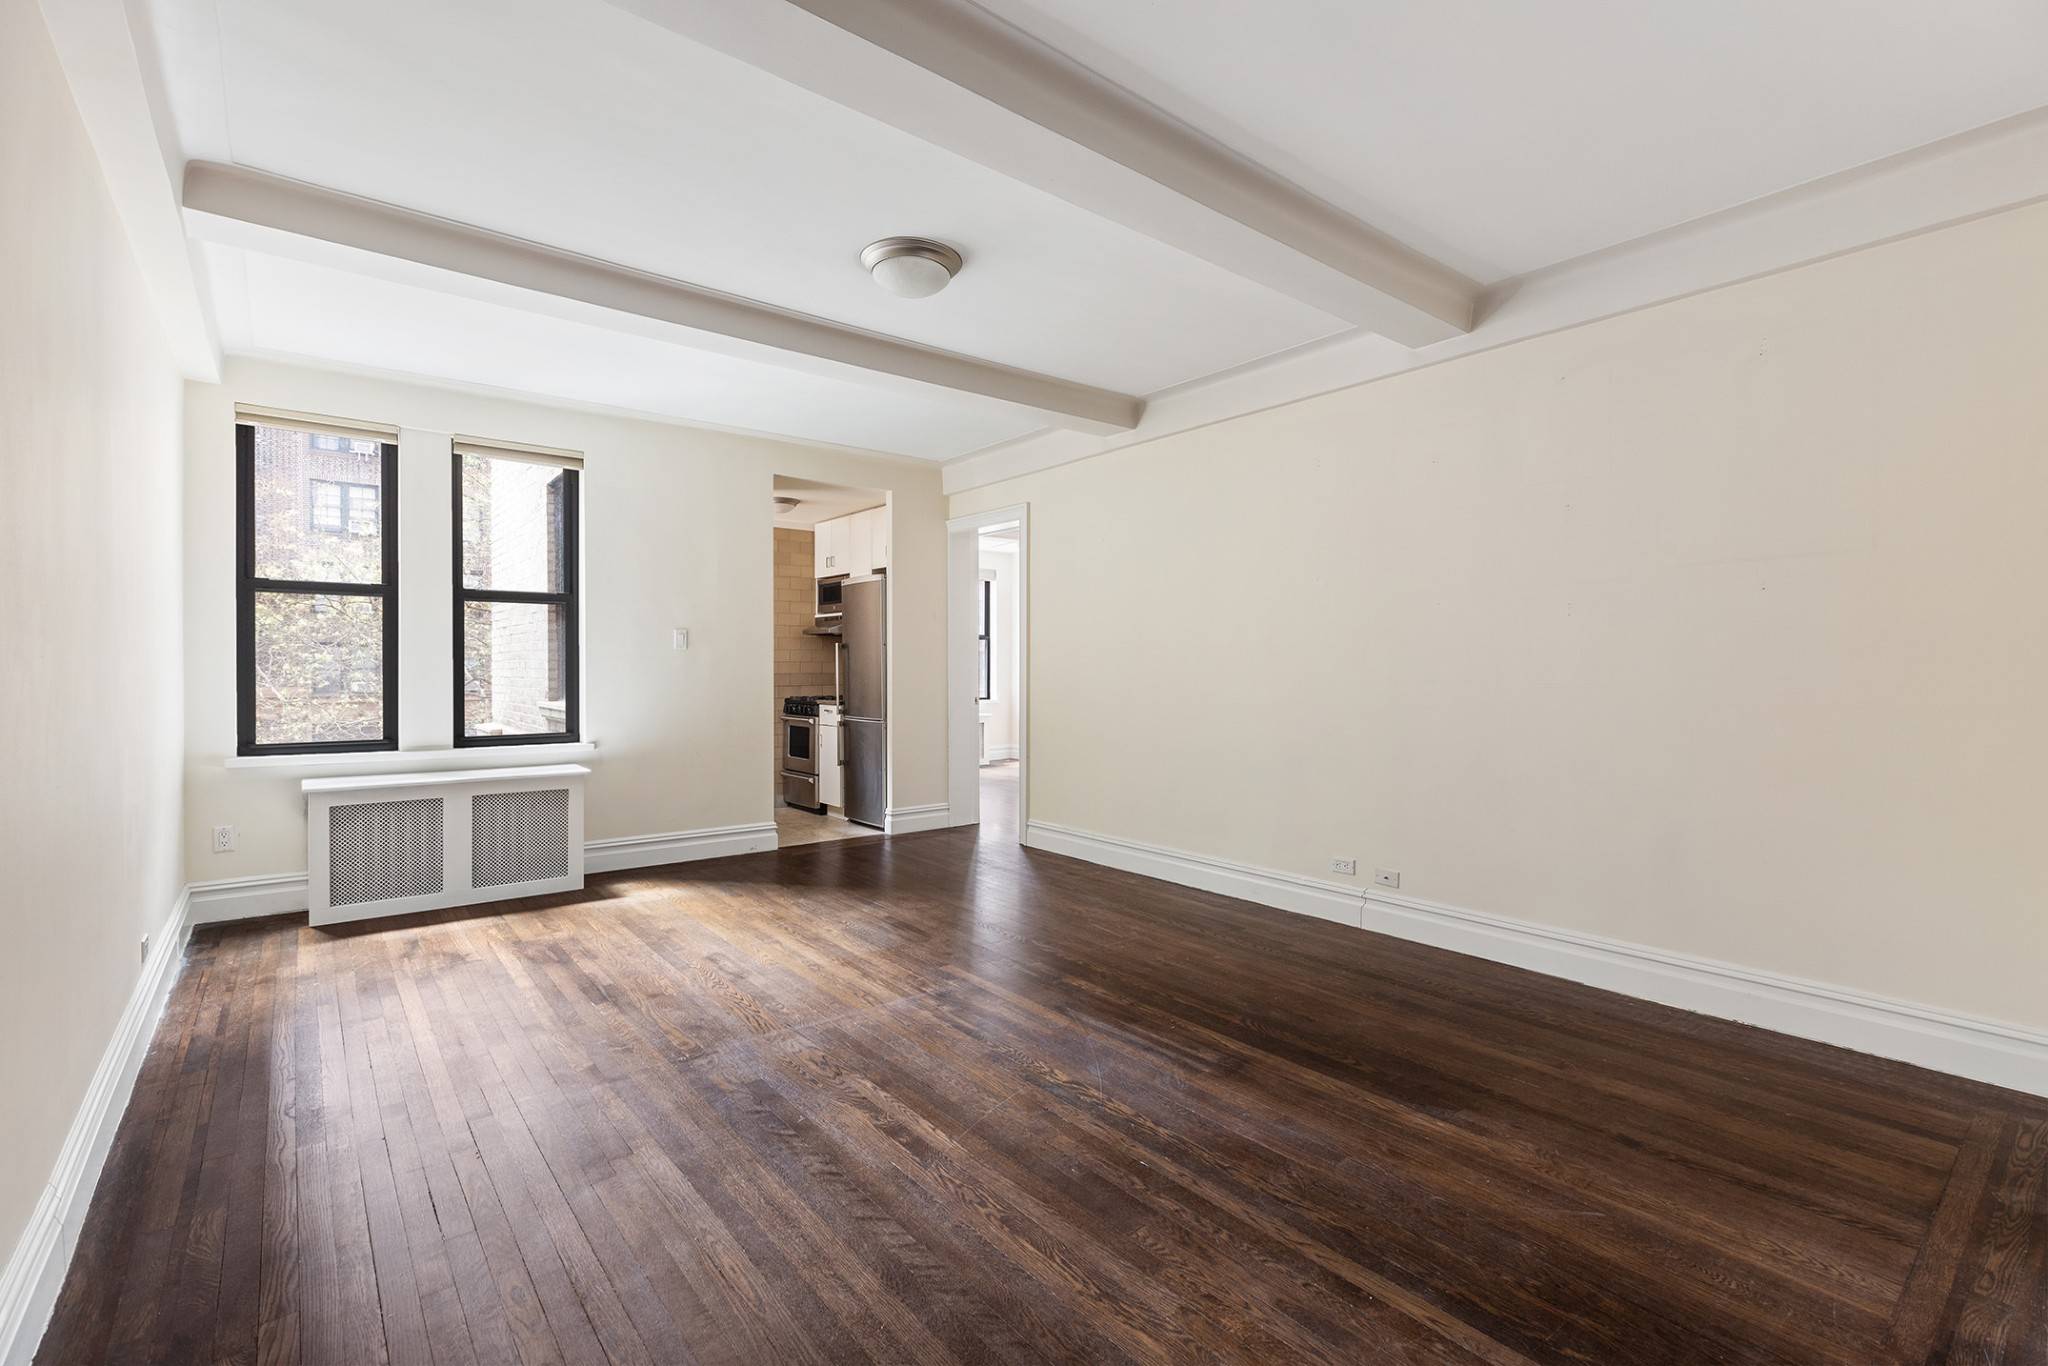 Welcome home ! This large, gut renovated 1 bedroom, 1 bathroom apartment is located just steps away from Central Park in the Hermitage, a white glove, full service condo doormen ...